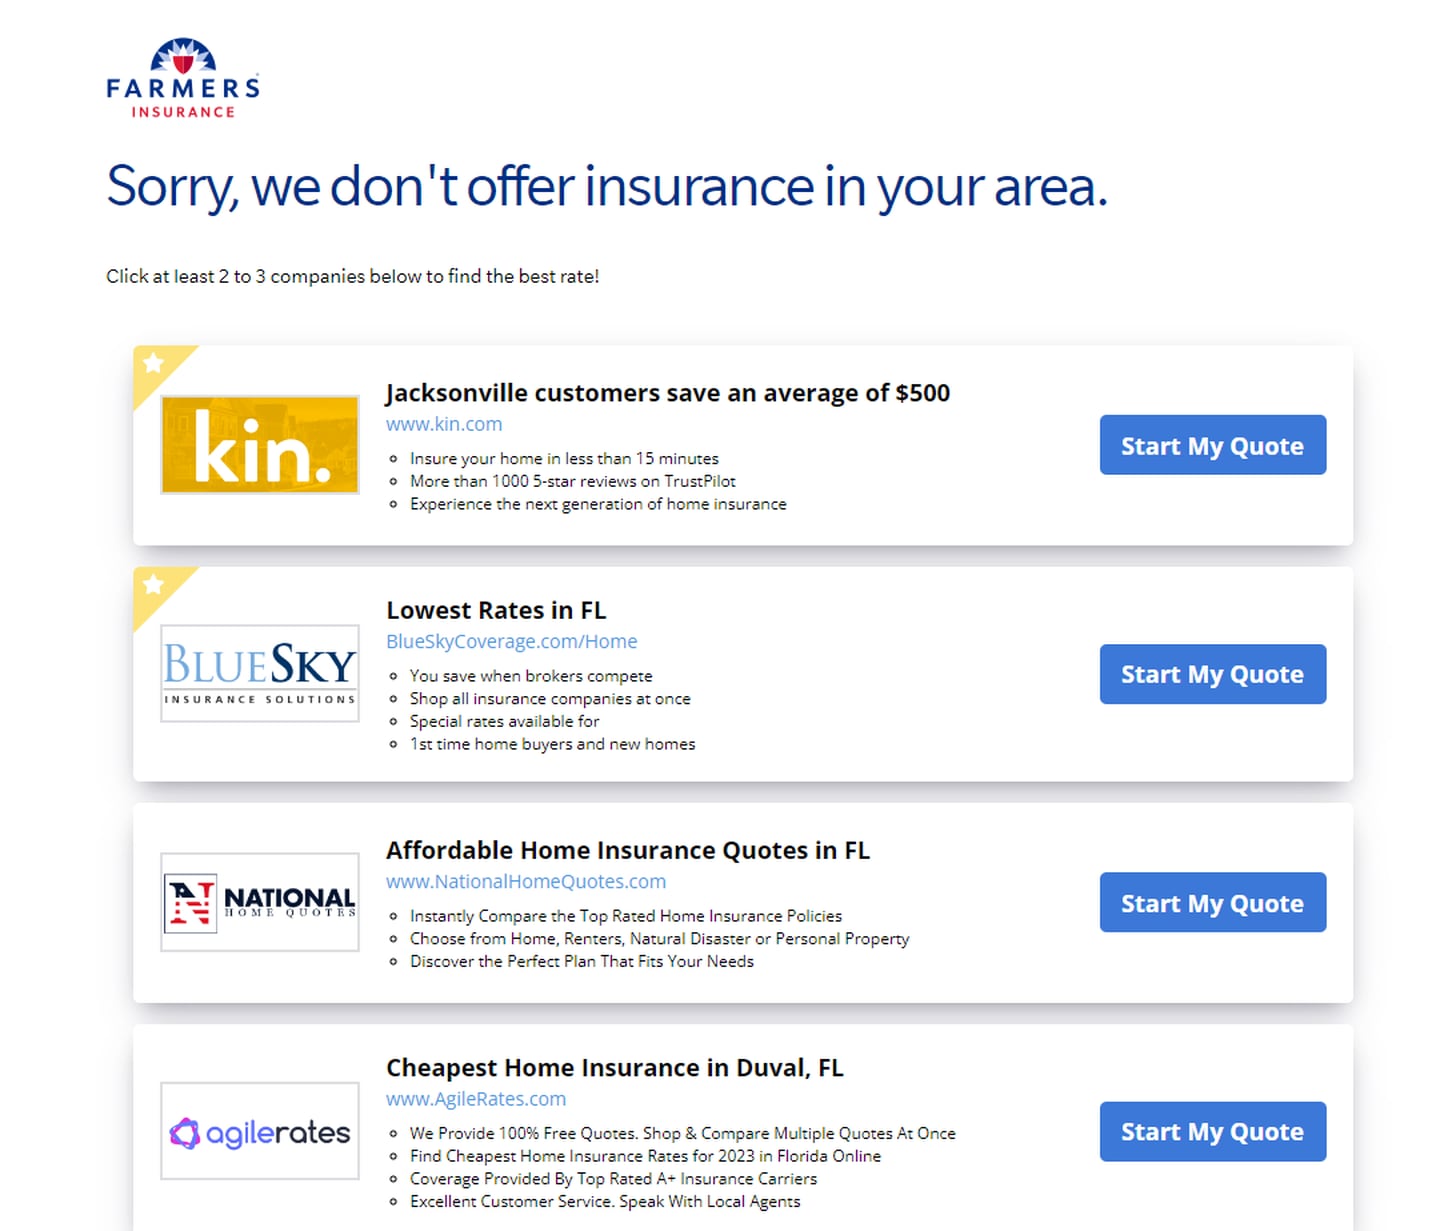 Farmers Insurance will not write new policies or renew existing policies in Florida.